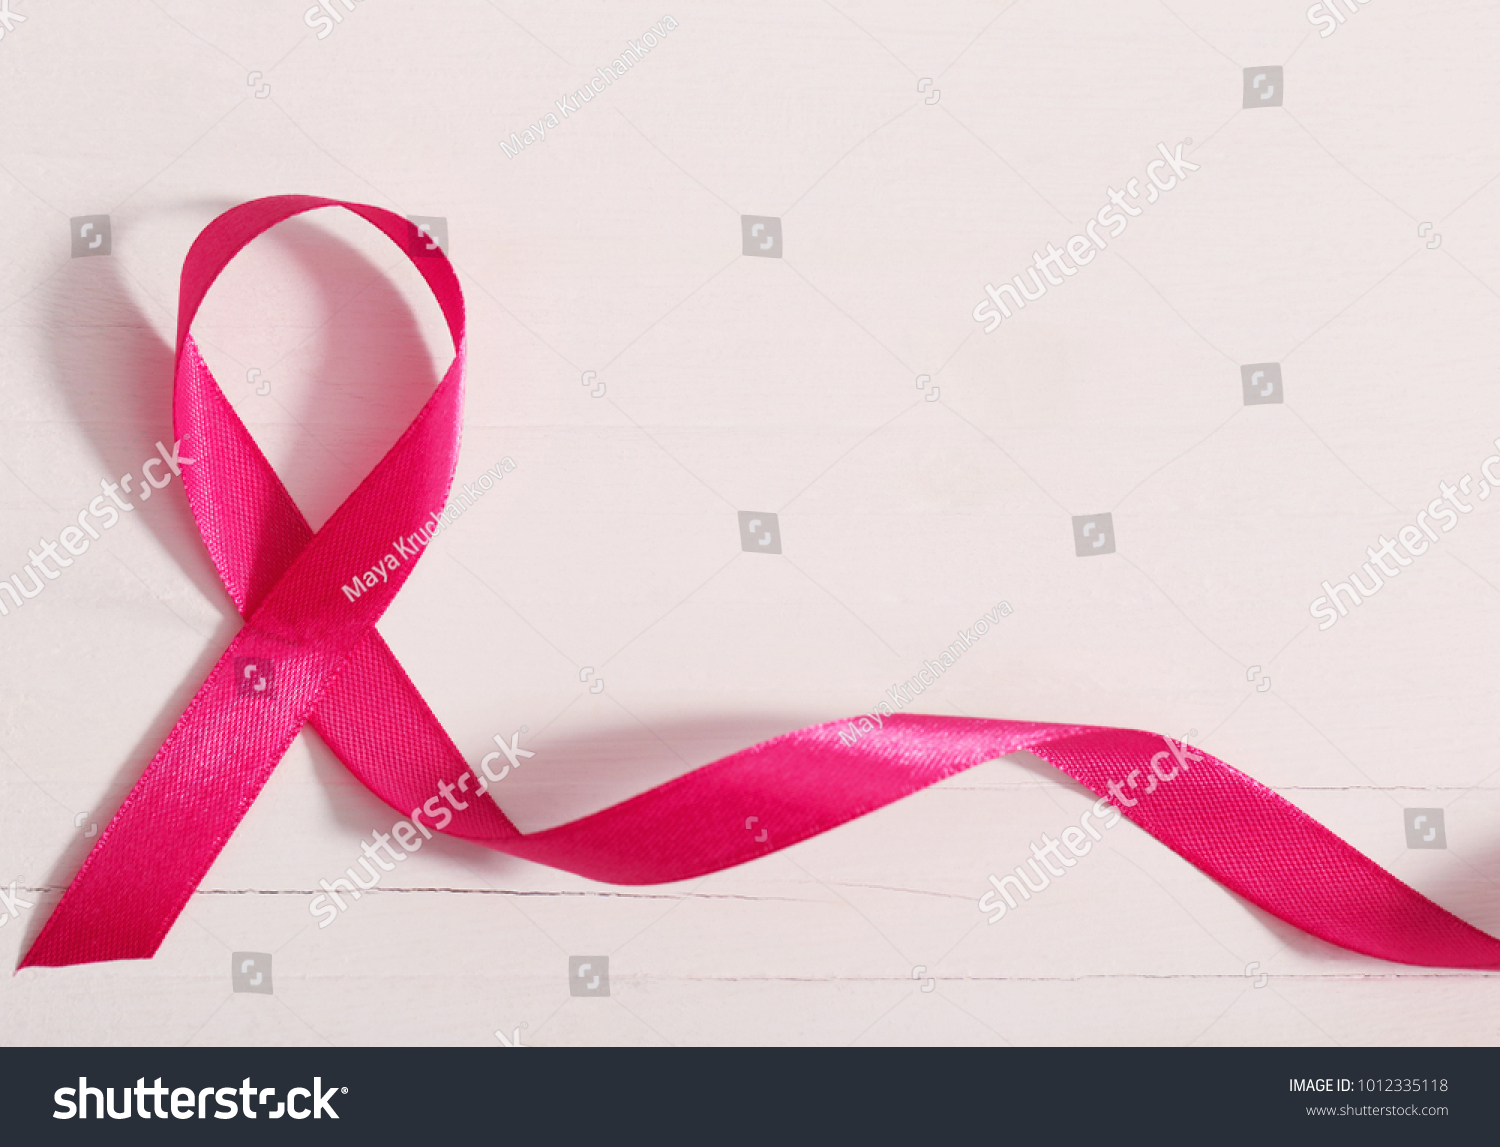 healthcare and medicine concept. pink breast cancer awareness ribbon on wooden white background #1012335118